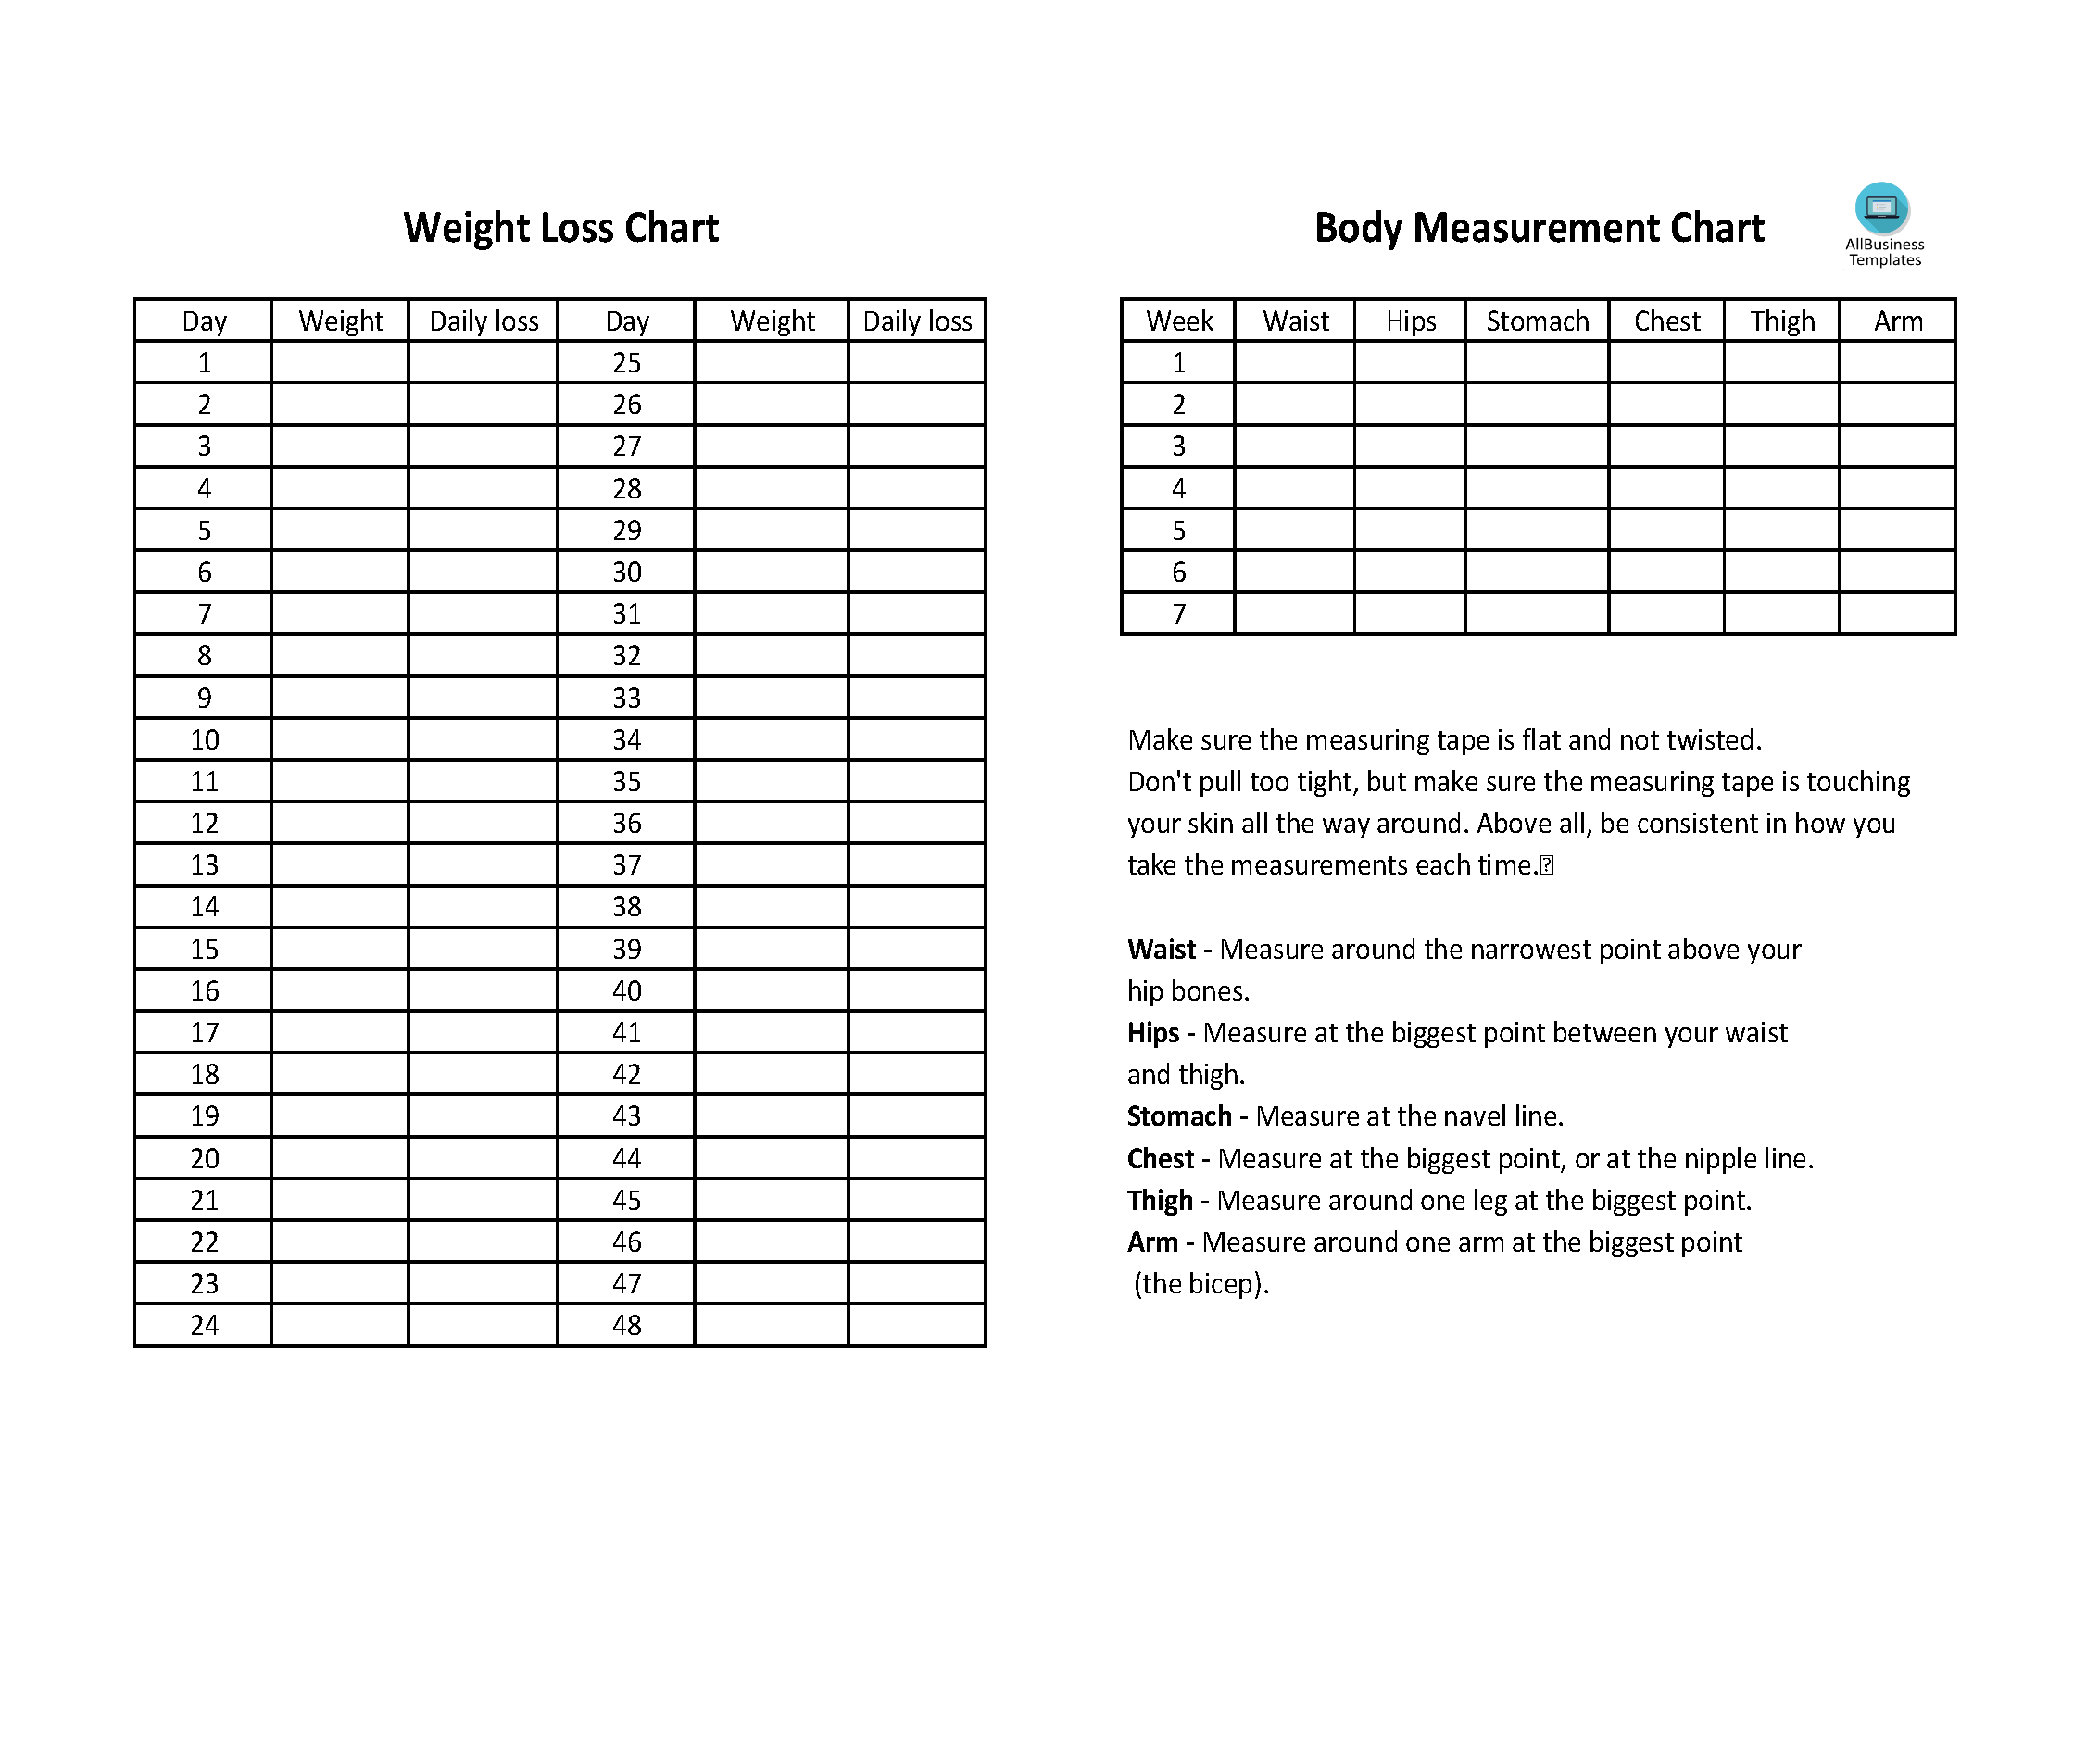 Weight Loss Measurement Chart | Templates at ...